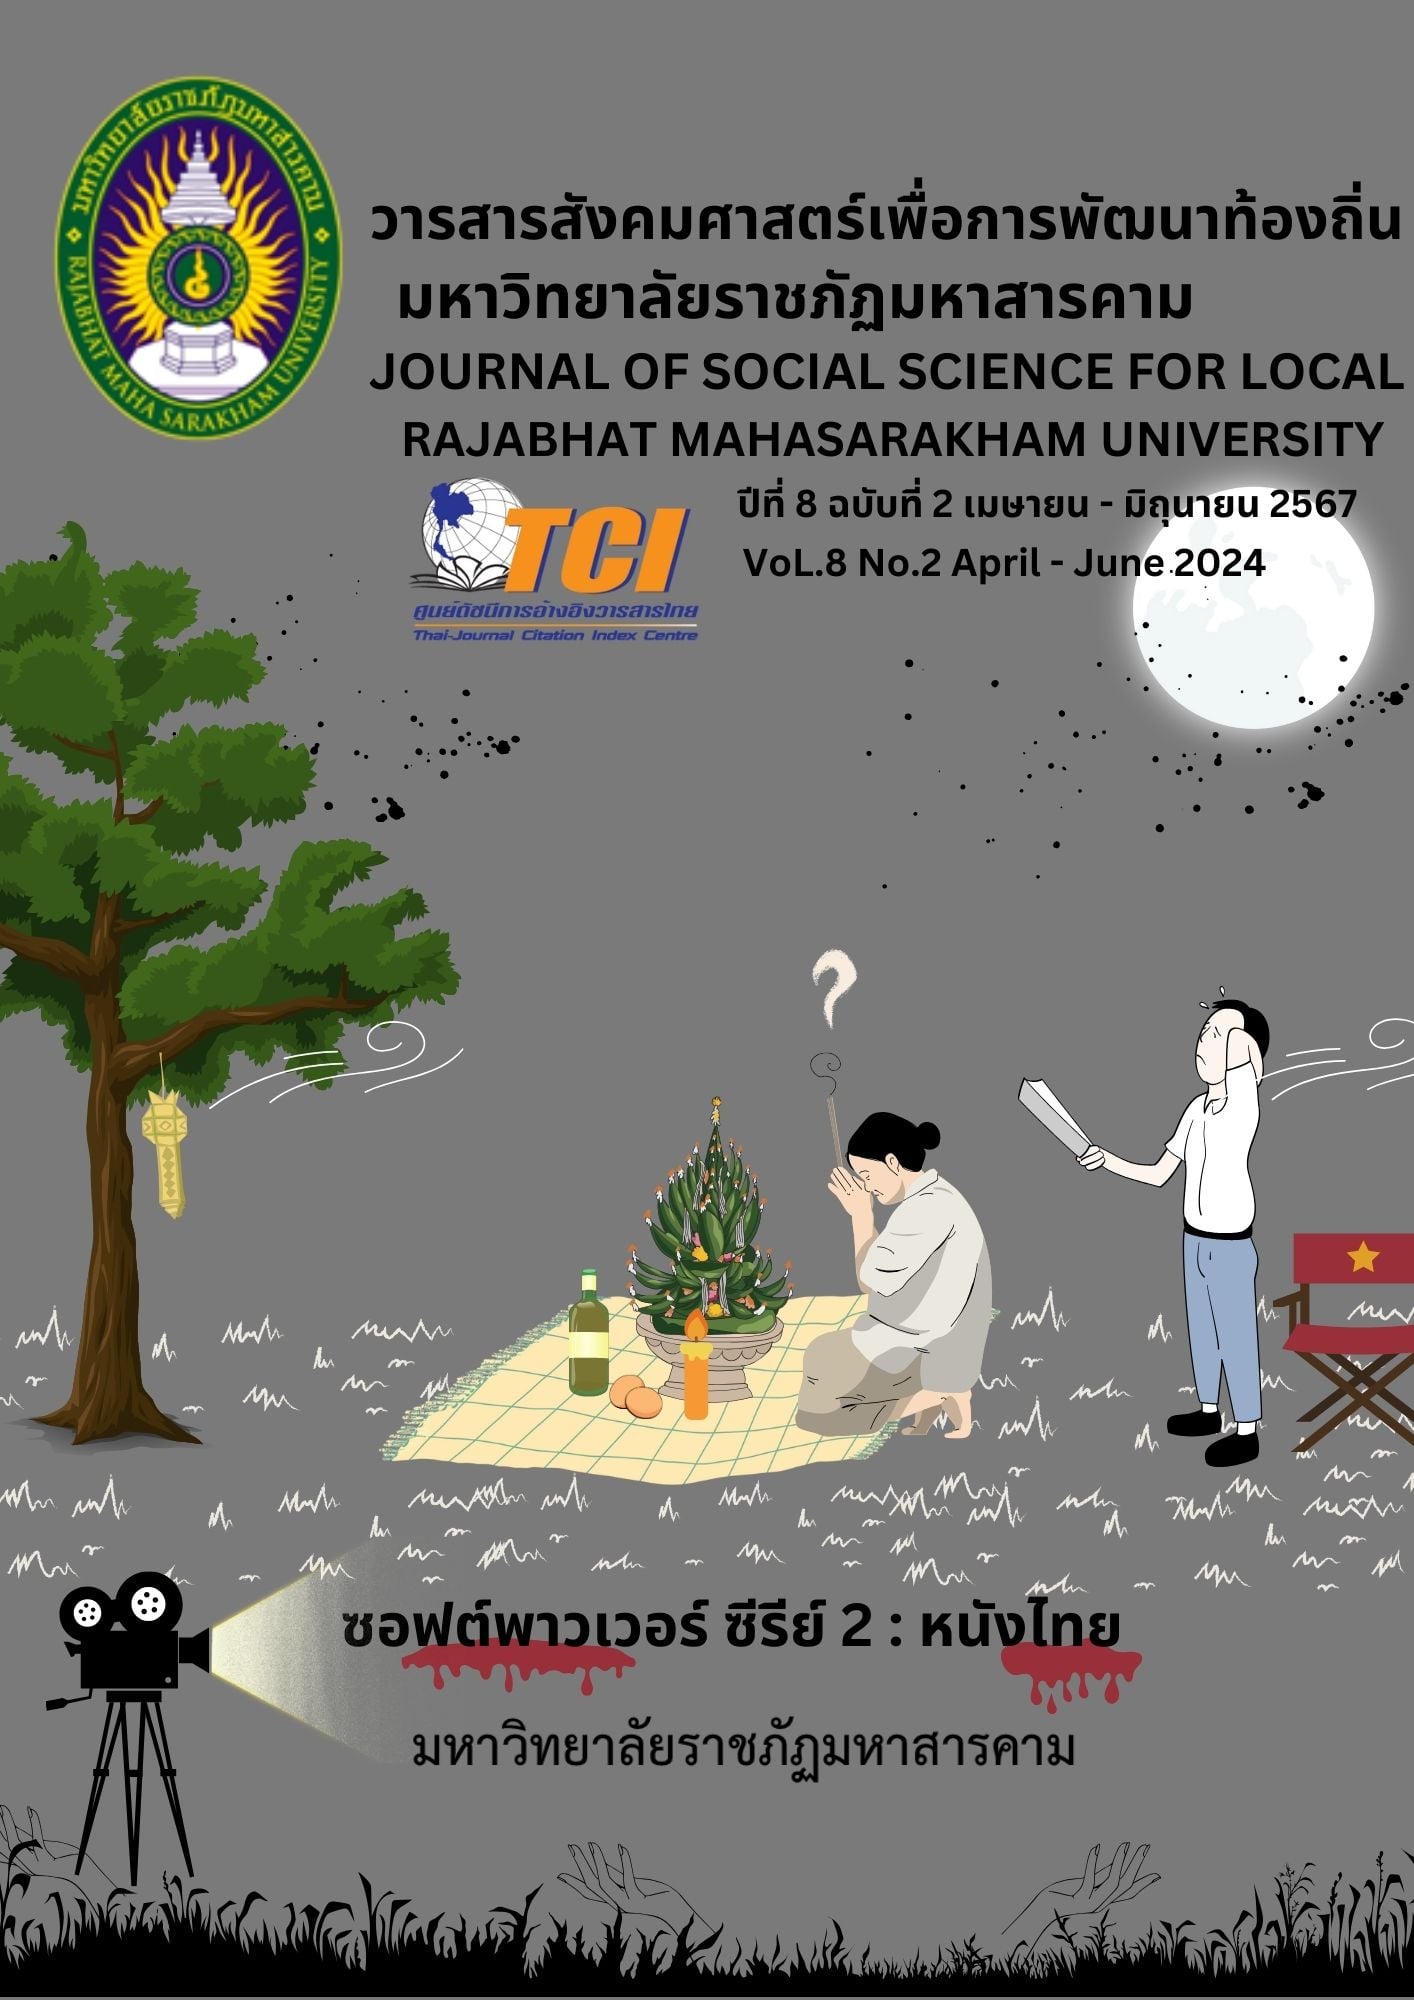 					View Vol. 8 No. 2 (2024): JOURNAL OF SOCIAL SCIENCE FOR LOCAL RAJABHAT MAHASARAKHAM UNIVERSITY
				